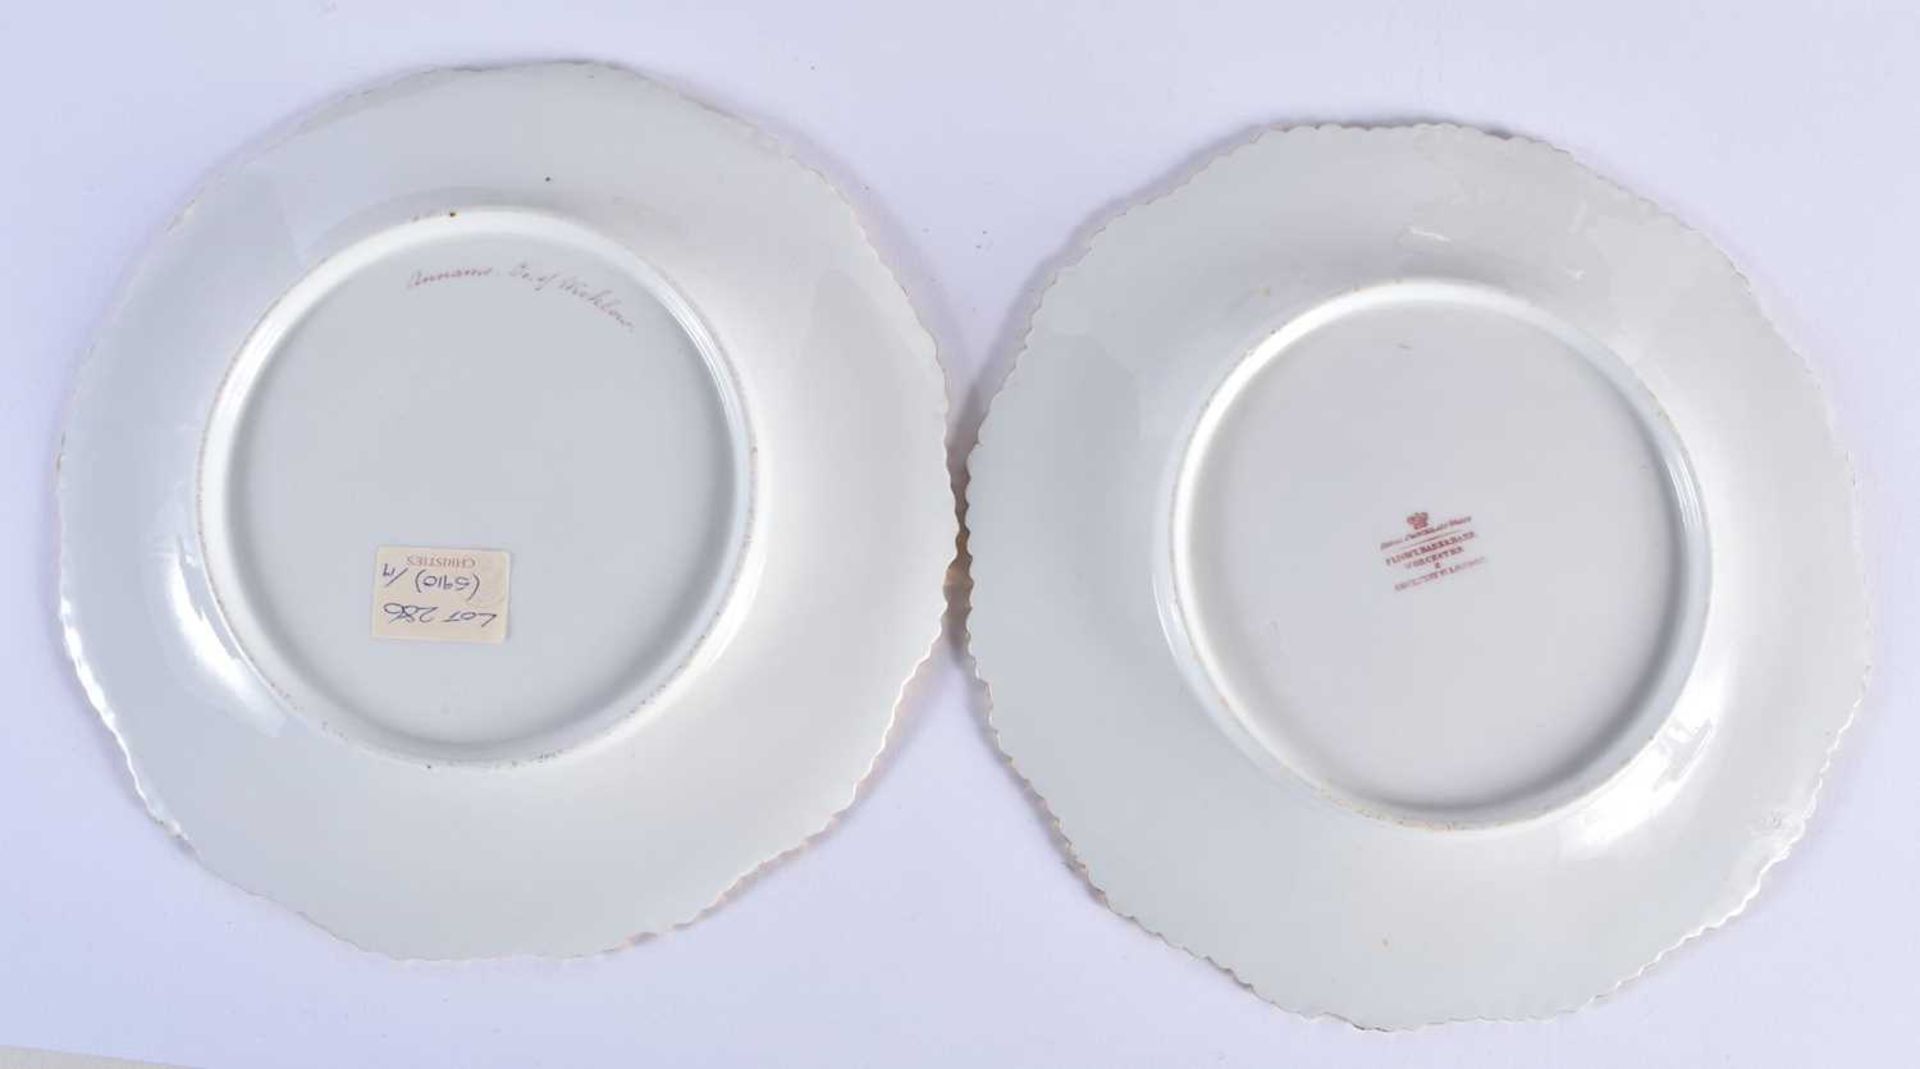 A FINE EARLY 19TH CENTURY FLIGHT BARR AND BARR WORCESTER DESSERT SERVICE painted with landscapes and - Image 6 of 32